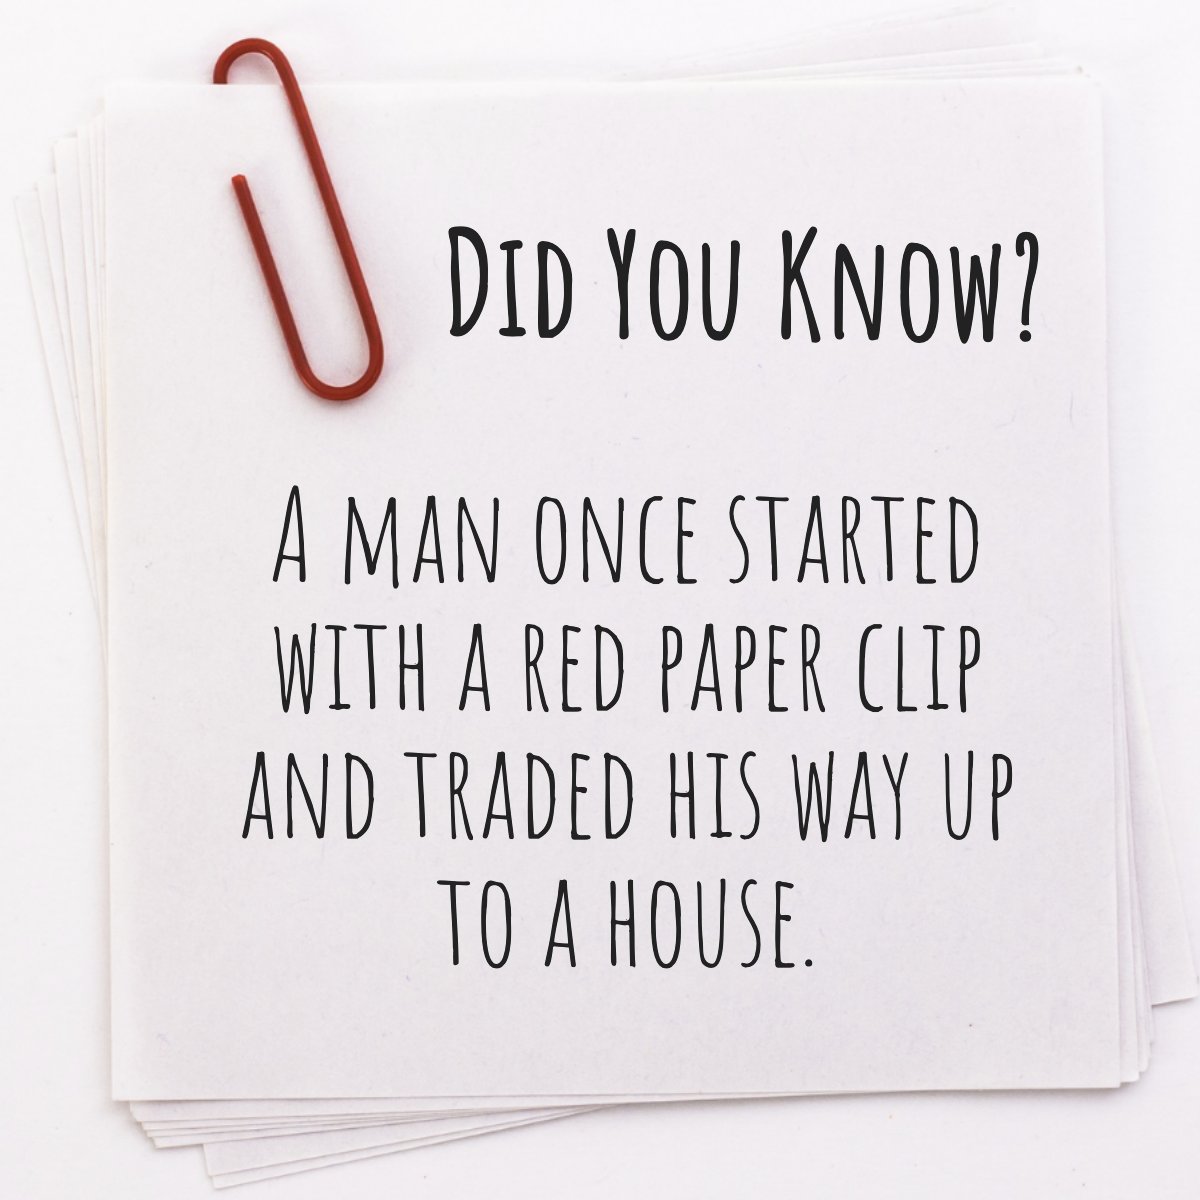 Did you know this? 😱

#didyouknowfacts #thisisforyou #diduknow #youknowwhatitis
 #EDINA